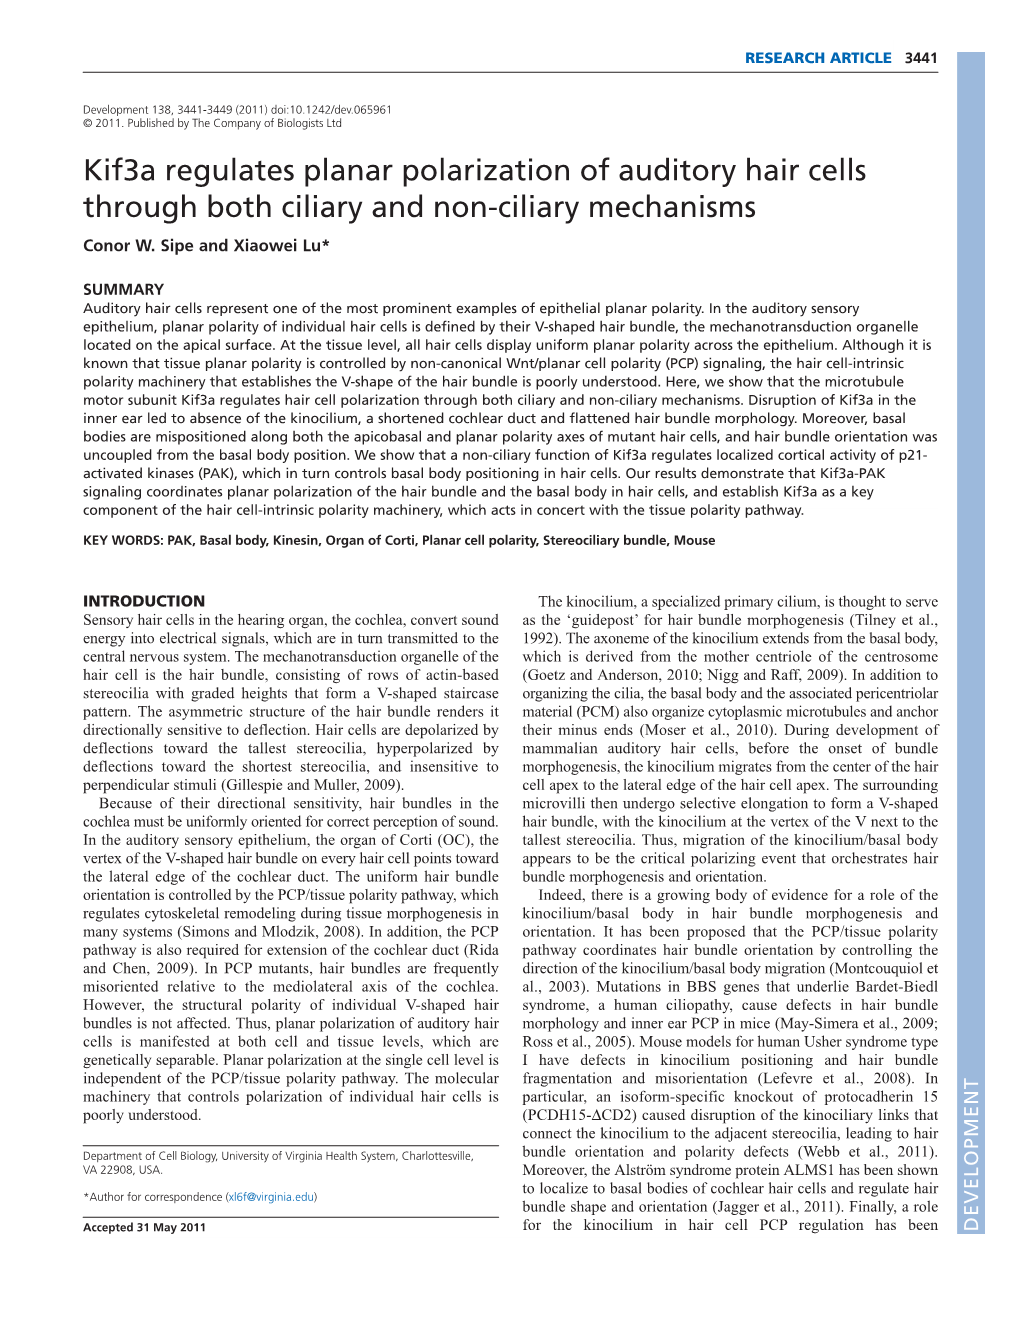 Kif3a Regulates Planar Polarization of Auditory Hair Cells Through Both Ciliary and Non-Ciliary Mechanisms Conor W